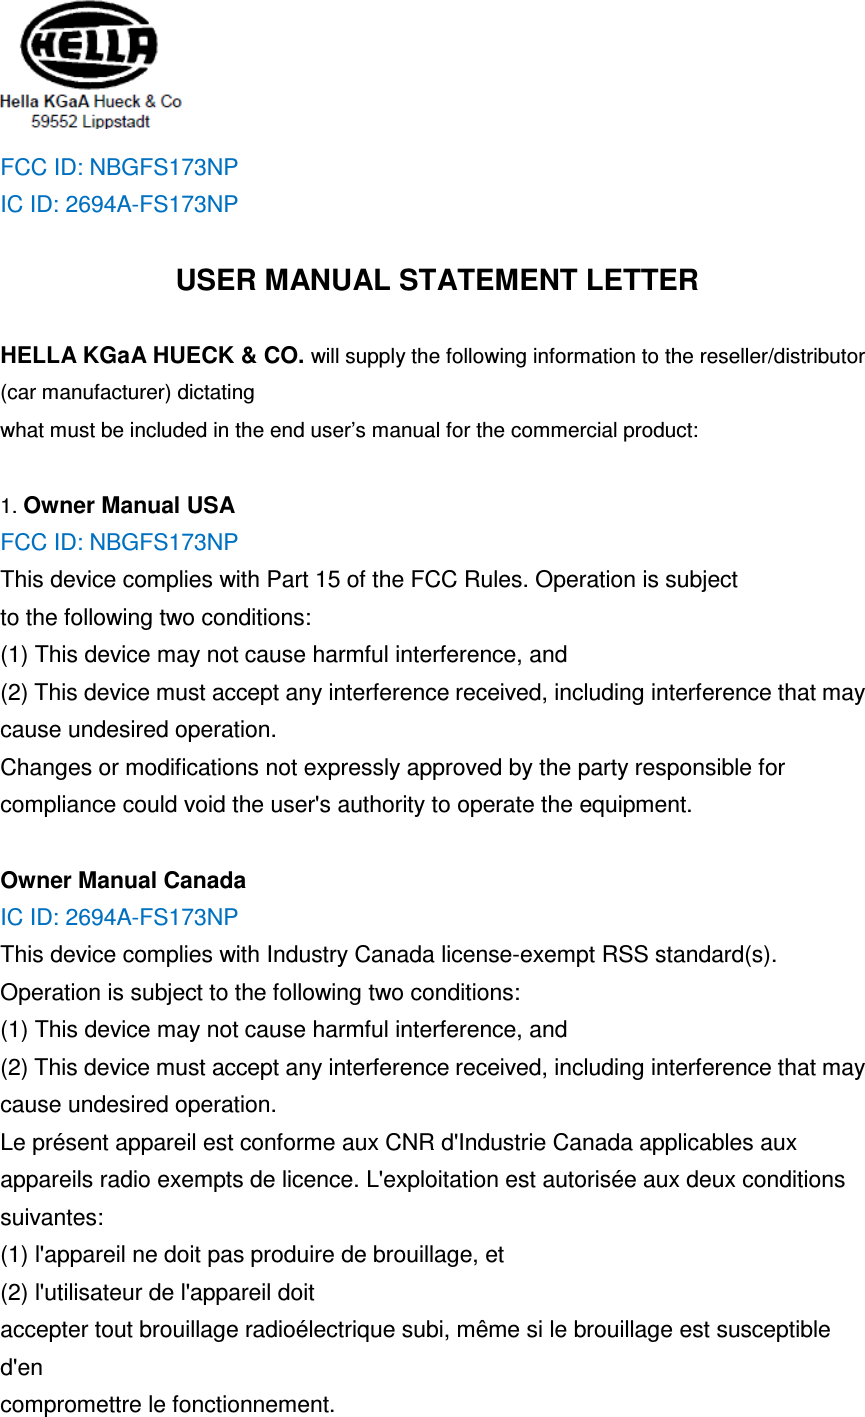  FCC ID: NBGFS173NP IC ID: 2694A-FS173NP  USER MANUAL STATEMENT LETTER  HELLA KGaA HUECK &amp; CO. will supply the following information to the reseller/distributor (car manufacturer) dictating what must be included in the end user’s manual for the commercial product:  1. Owner Manual USA FCC ID: NBGFS173NP This device complies with Part 15 of the FCC Rules. Operation is subject to the following two conditions: (1) This device may not cause harmful interference, and   (2) This device must accept any interference received, including interference that may cause undesired operation. Changes or modifications not expressly approved by the party responsible for compliance could void the user&apos;s authority to operate the equipment.  Owner Manual Canada IC ID: 2694A-FS173NP This device complies with Industry Canada license-exempt RSS standard(s). Operation is subject to the following two conditions: (1) This device may not cause harmful interference, and   (2) This device must accept any interference received, including interference that may cause undesired operation. Le présent appareil est conforme aux CNR d&apos;Industrie Canada applicables aux appareils radio exempts de licence. L&apos;exploitation est autorisée aux deux conditions suivantes: (1) l&apos;appareil ne doit pas produire de brouillage, et   (2) l&apos;utilisateur de l&apos;appareil doit accepter tout brouillage radioélectrique subi, même si le brouillage est susceptible d&apos;en compromettre le fonctionnement. 